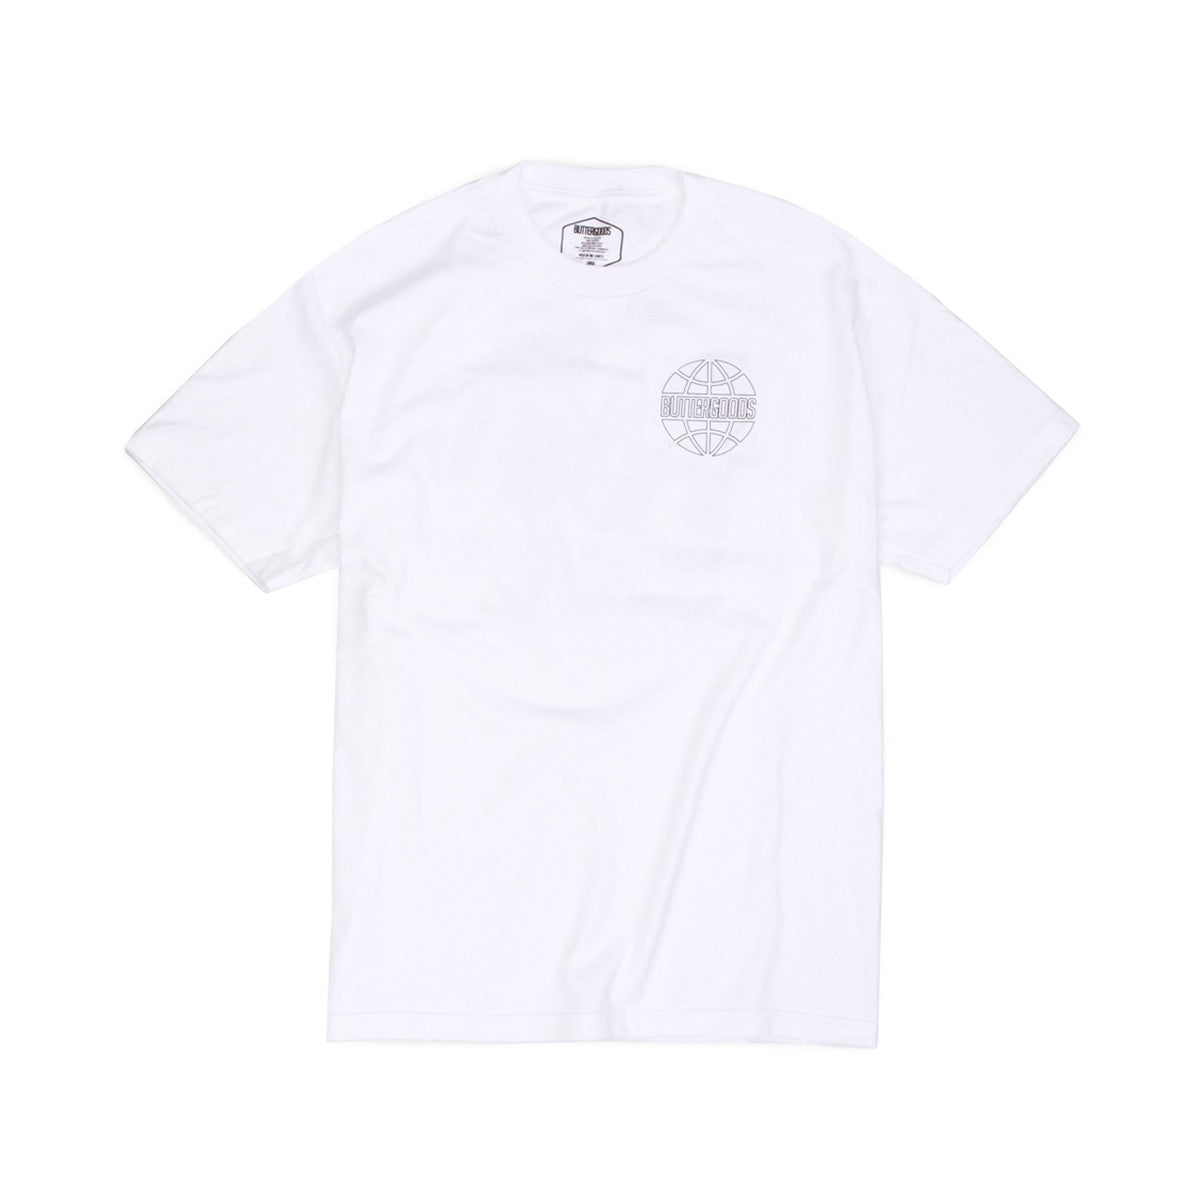 Butter Goods Reflective Outline T-shirt - White – PERMANENT